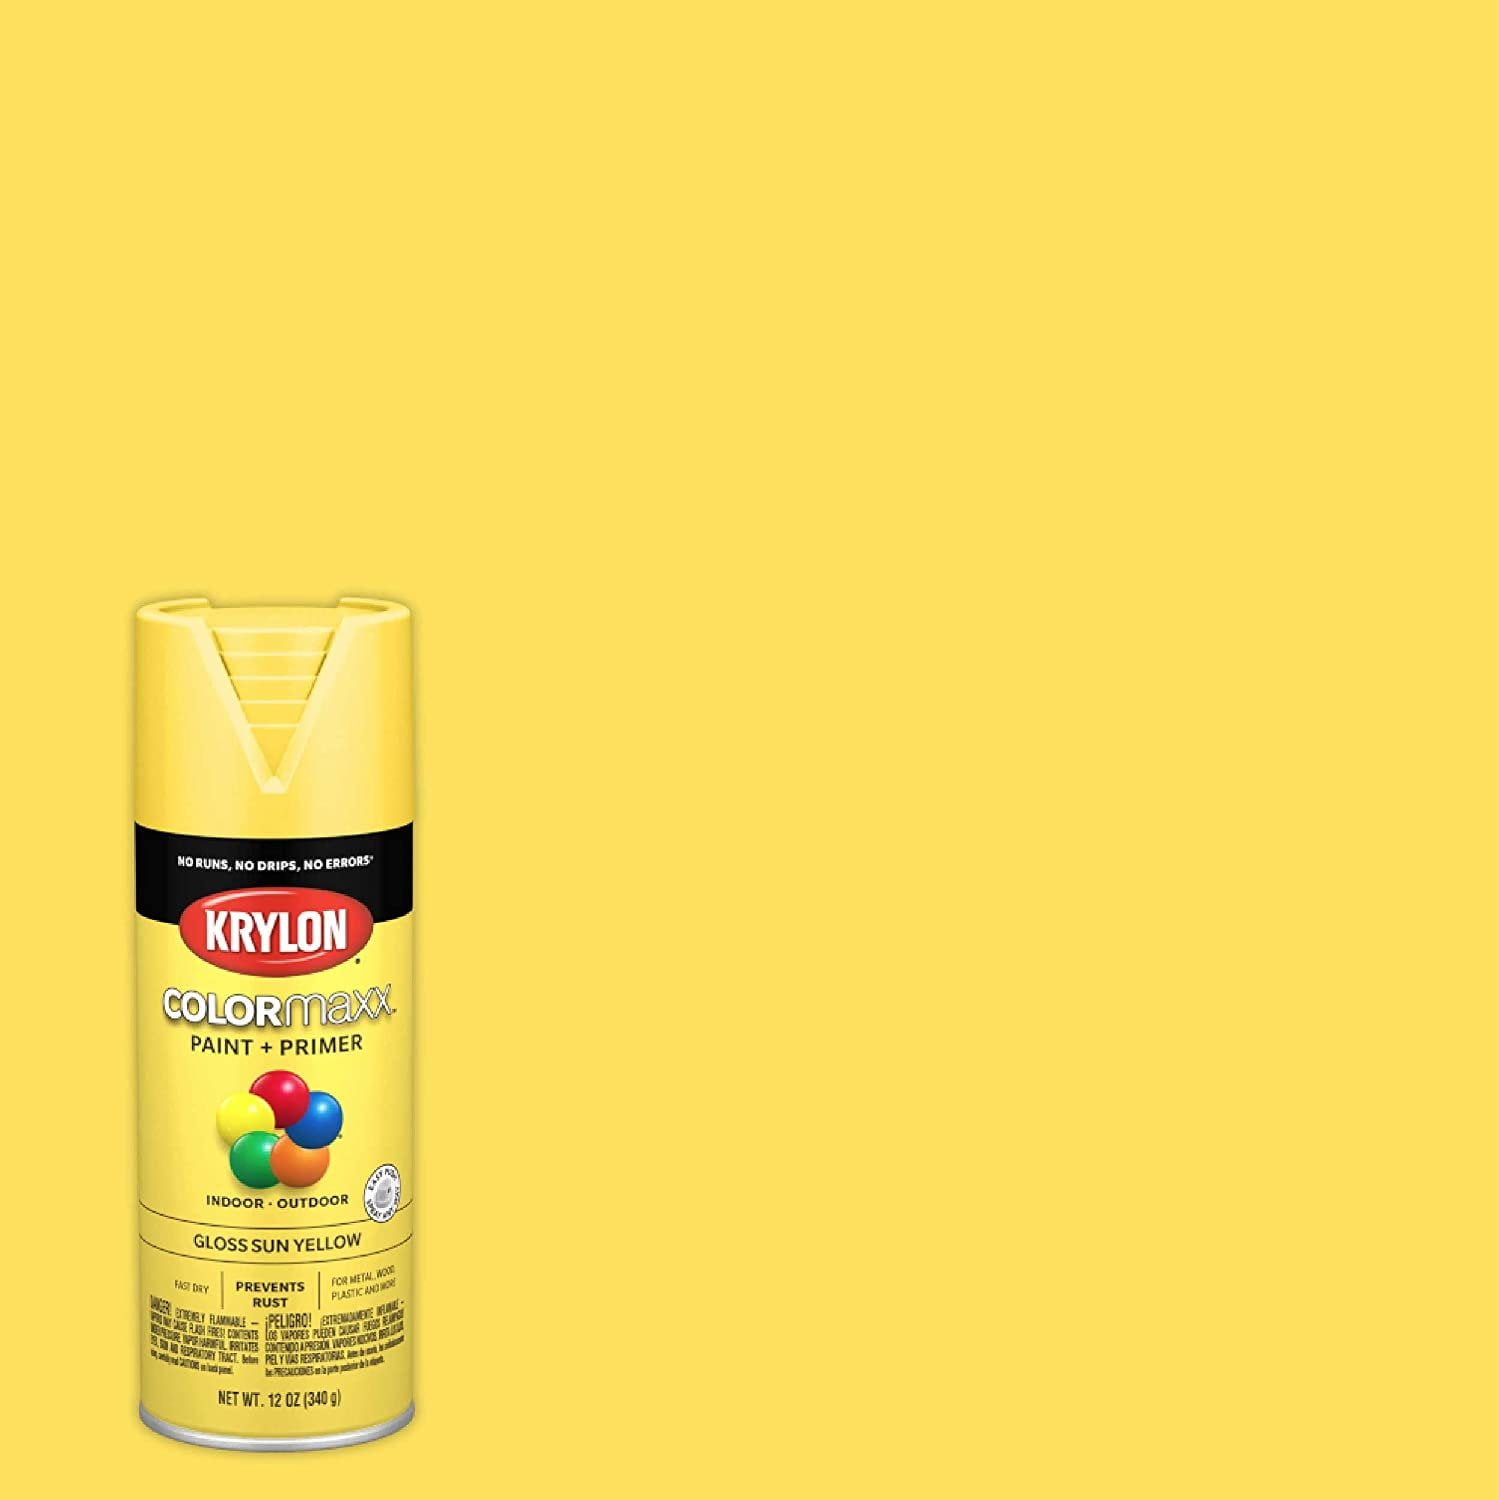 Krylon K02765007 Fusion All-In-One Spray Paint for Indoor/Outdoor Use, Matte  Wild Honey Golden Yellow, 12 Ounce (Pack of 1) 